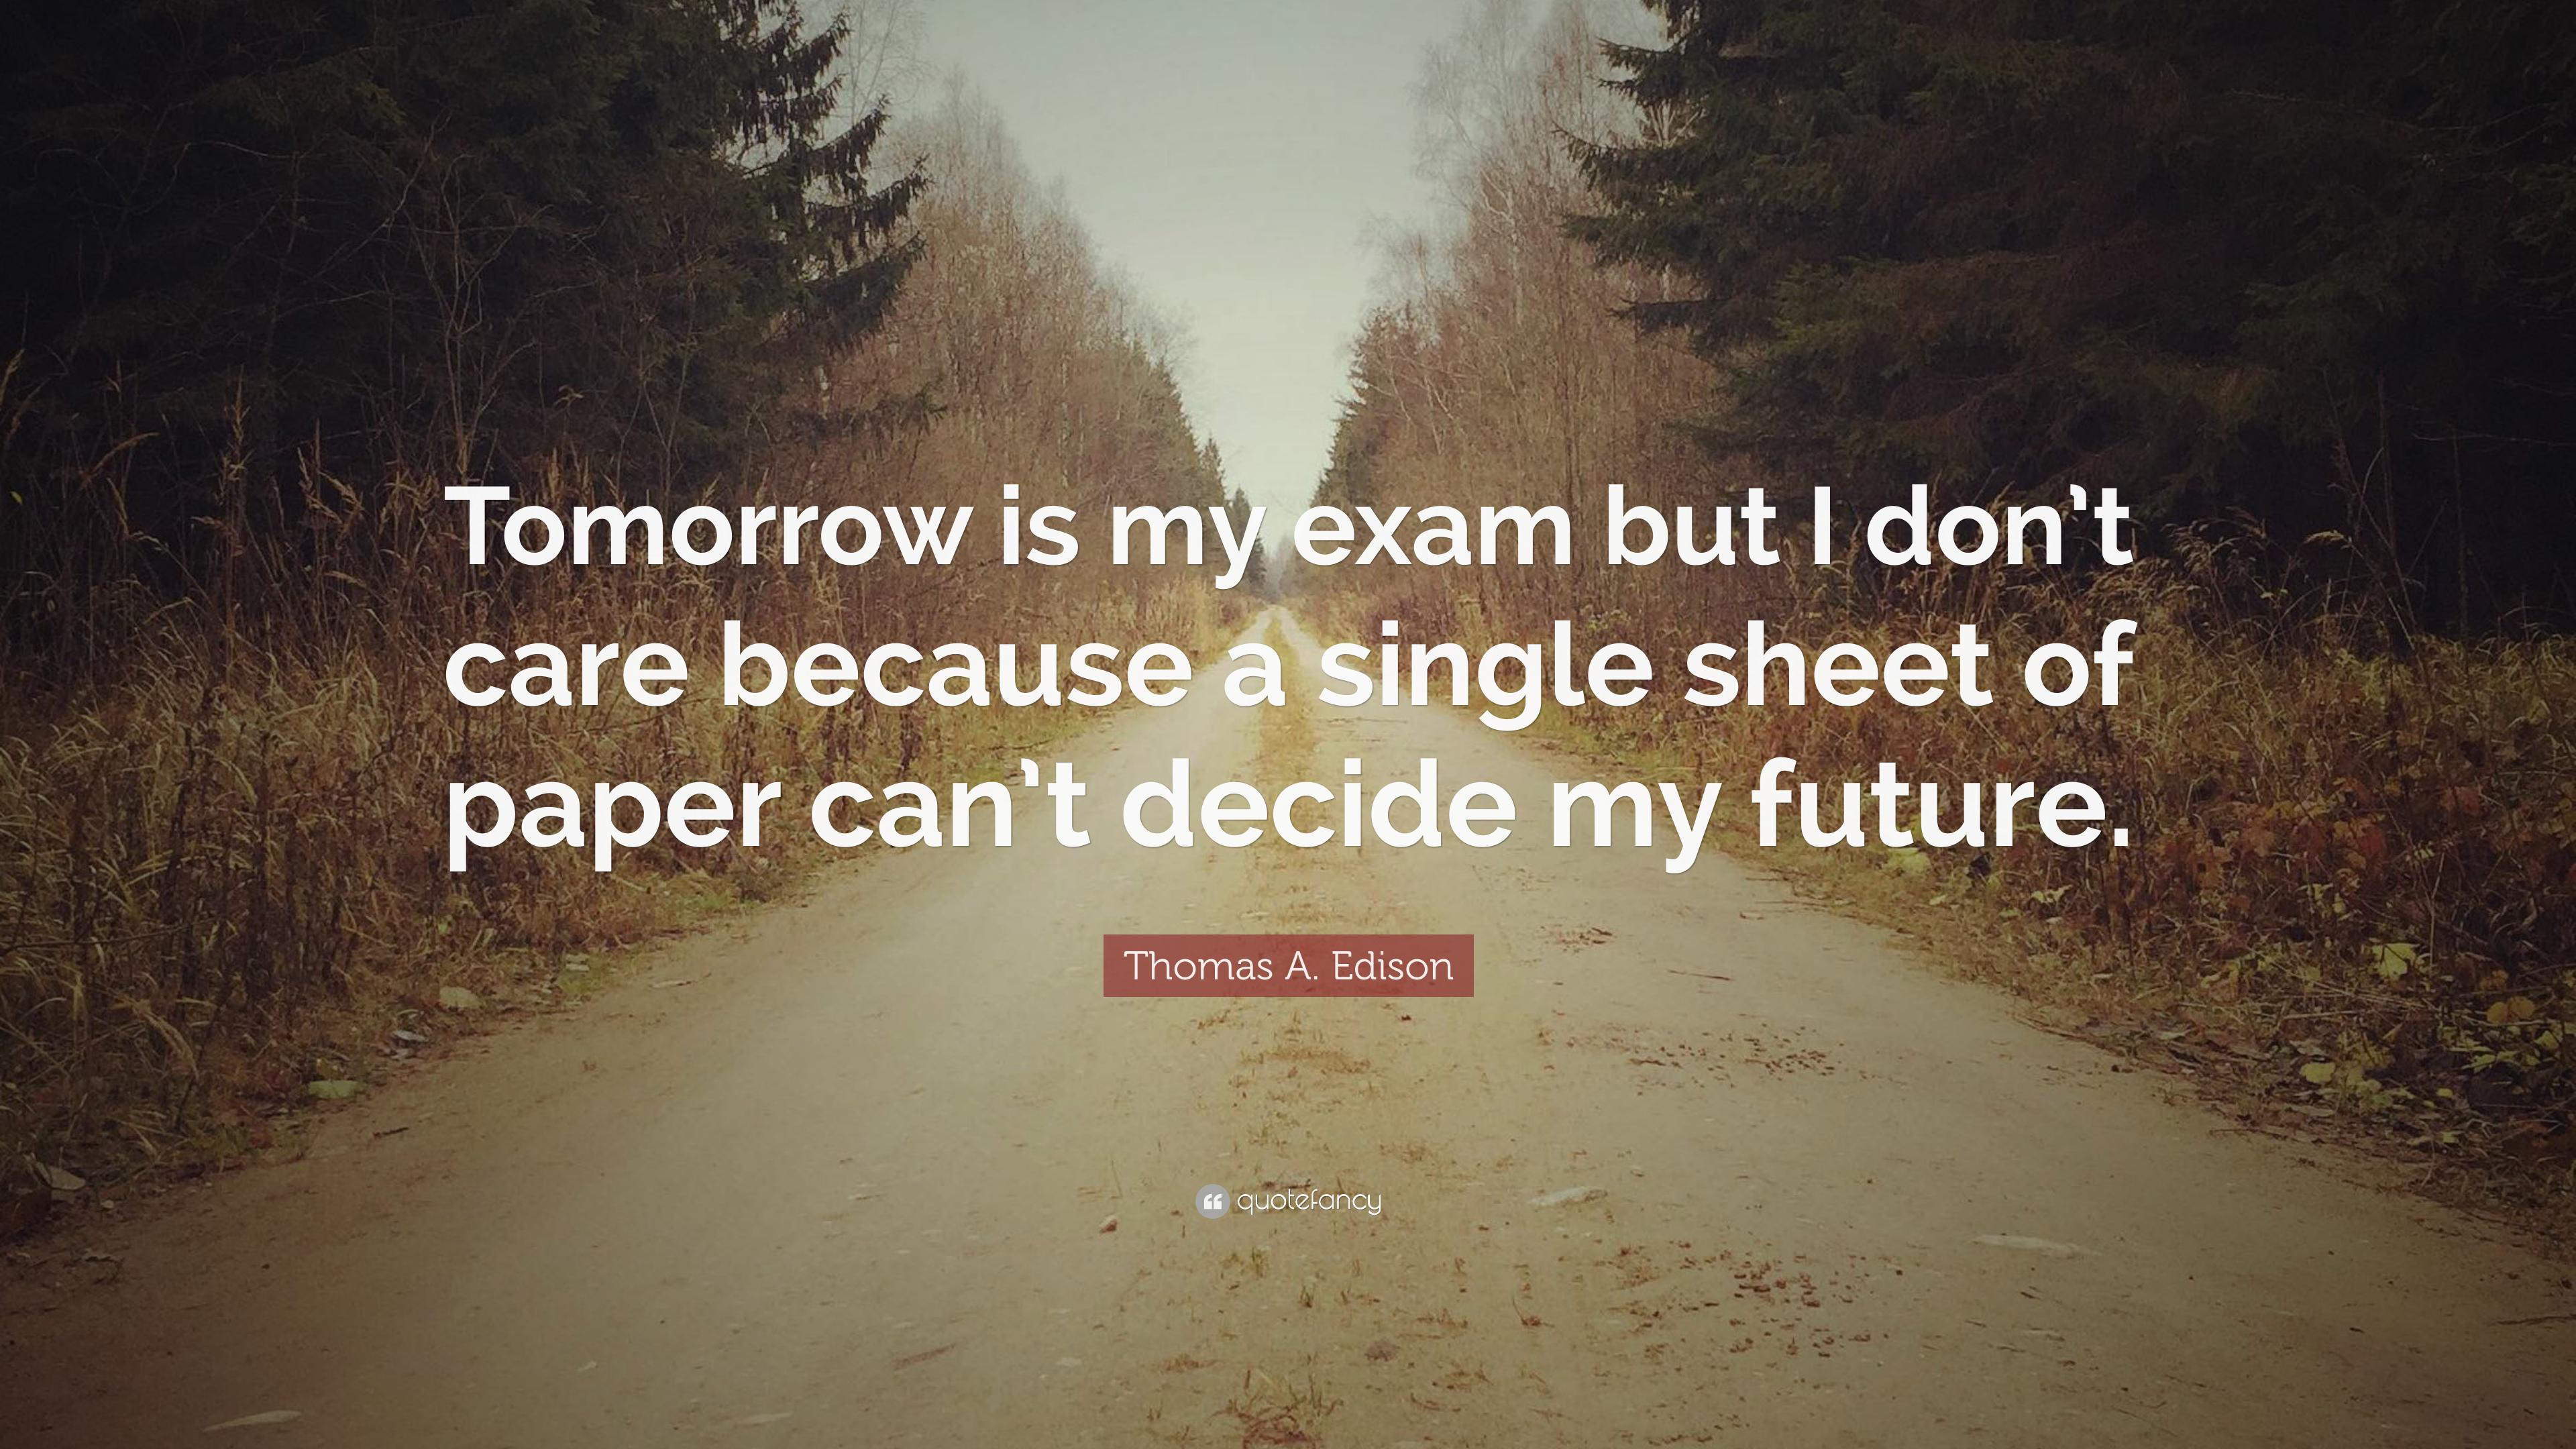 Thomas A. Edison Quote: “Tomorrow is my exam but I don't care